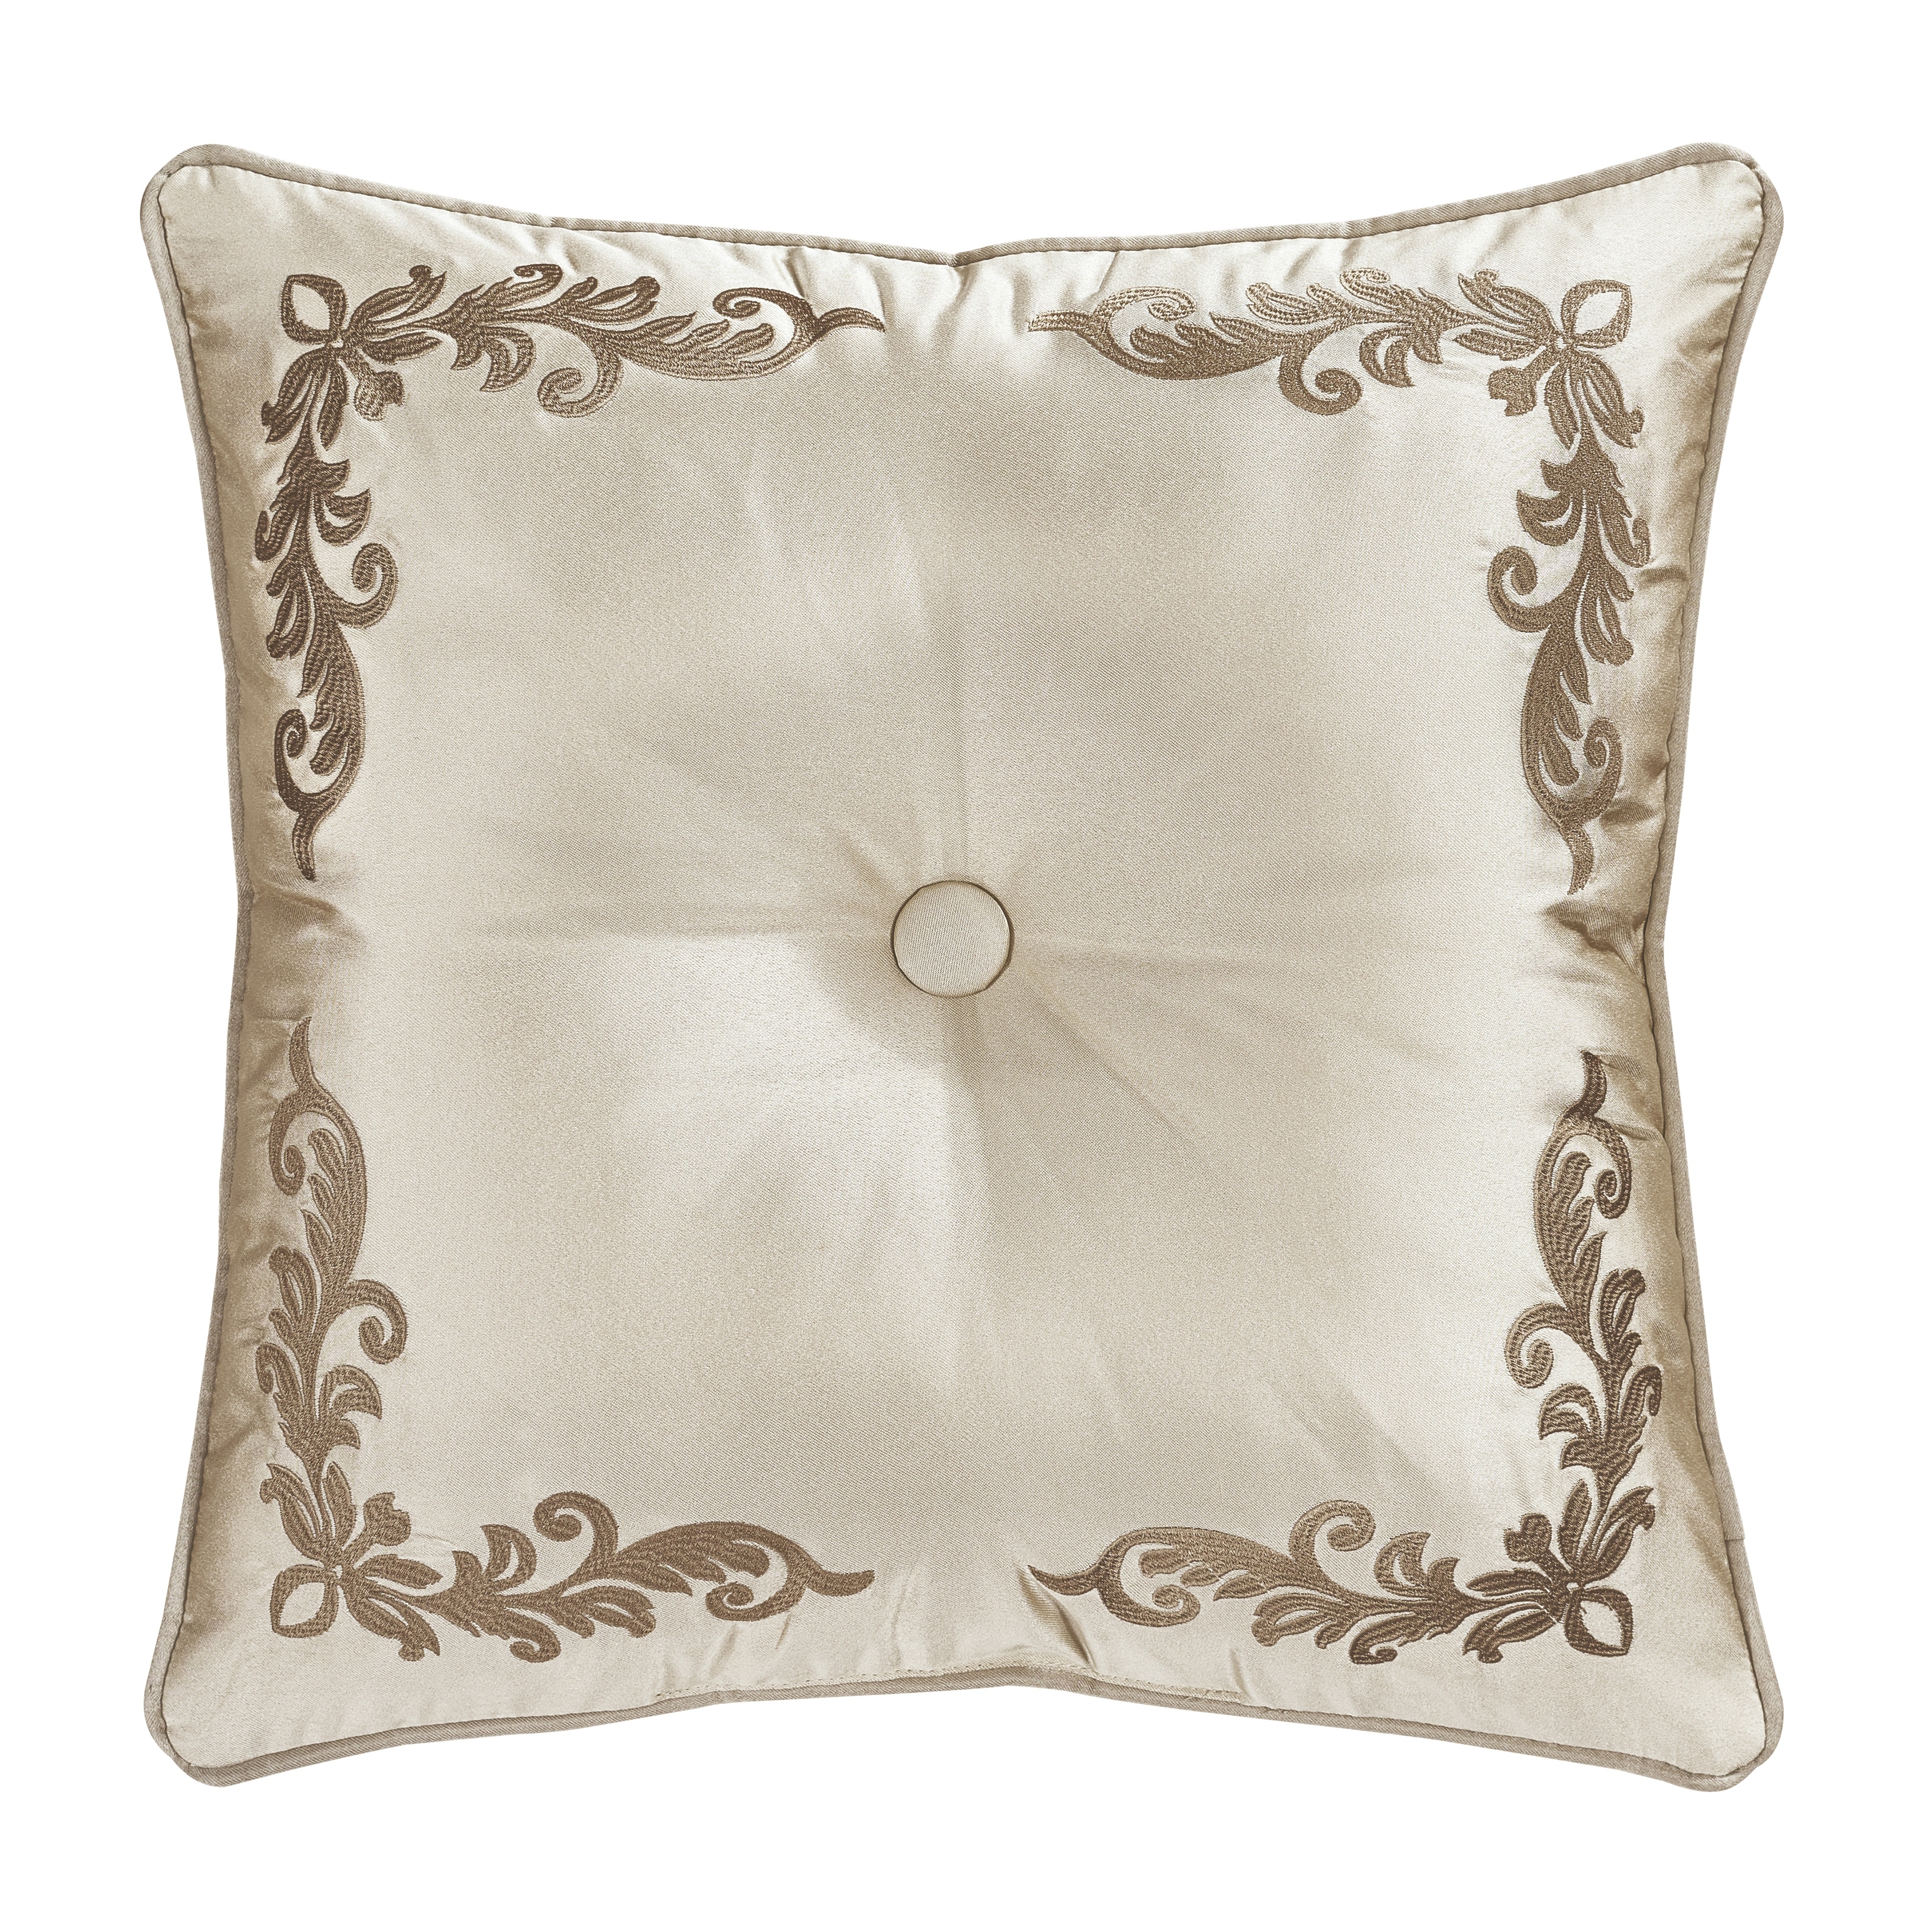 Sandstone Beige Square Embellished Decorative Throw Pillow 18 x 18 By J  Queen